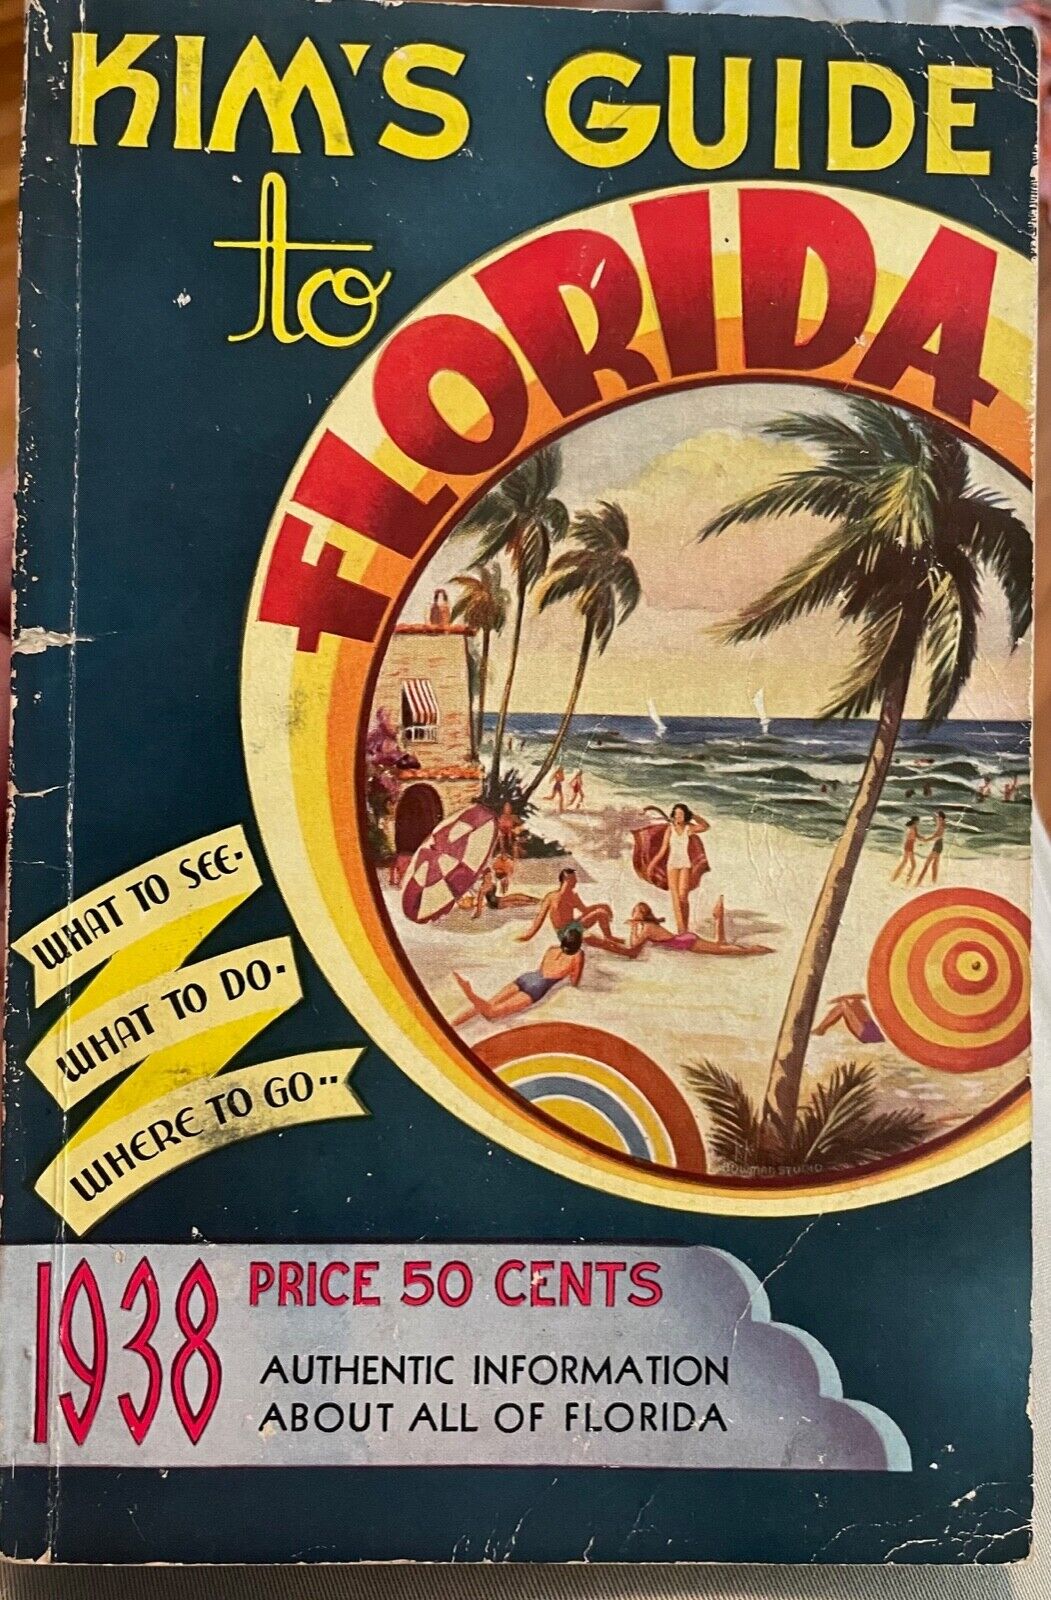 1938 Kim's Guide to Florida 192-page Roadside Travel Guide